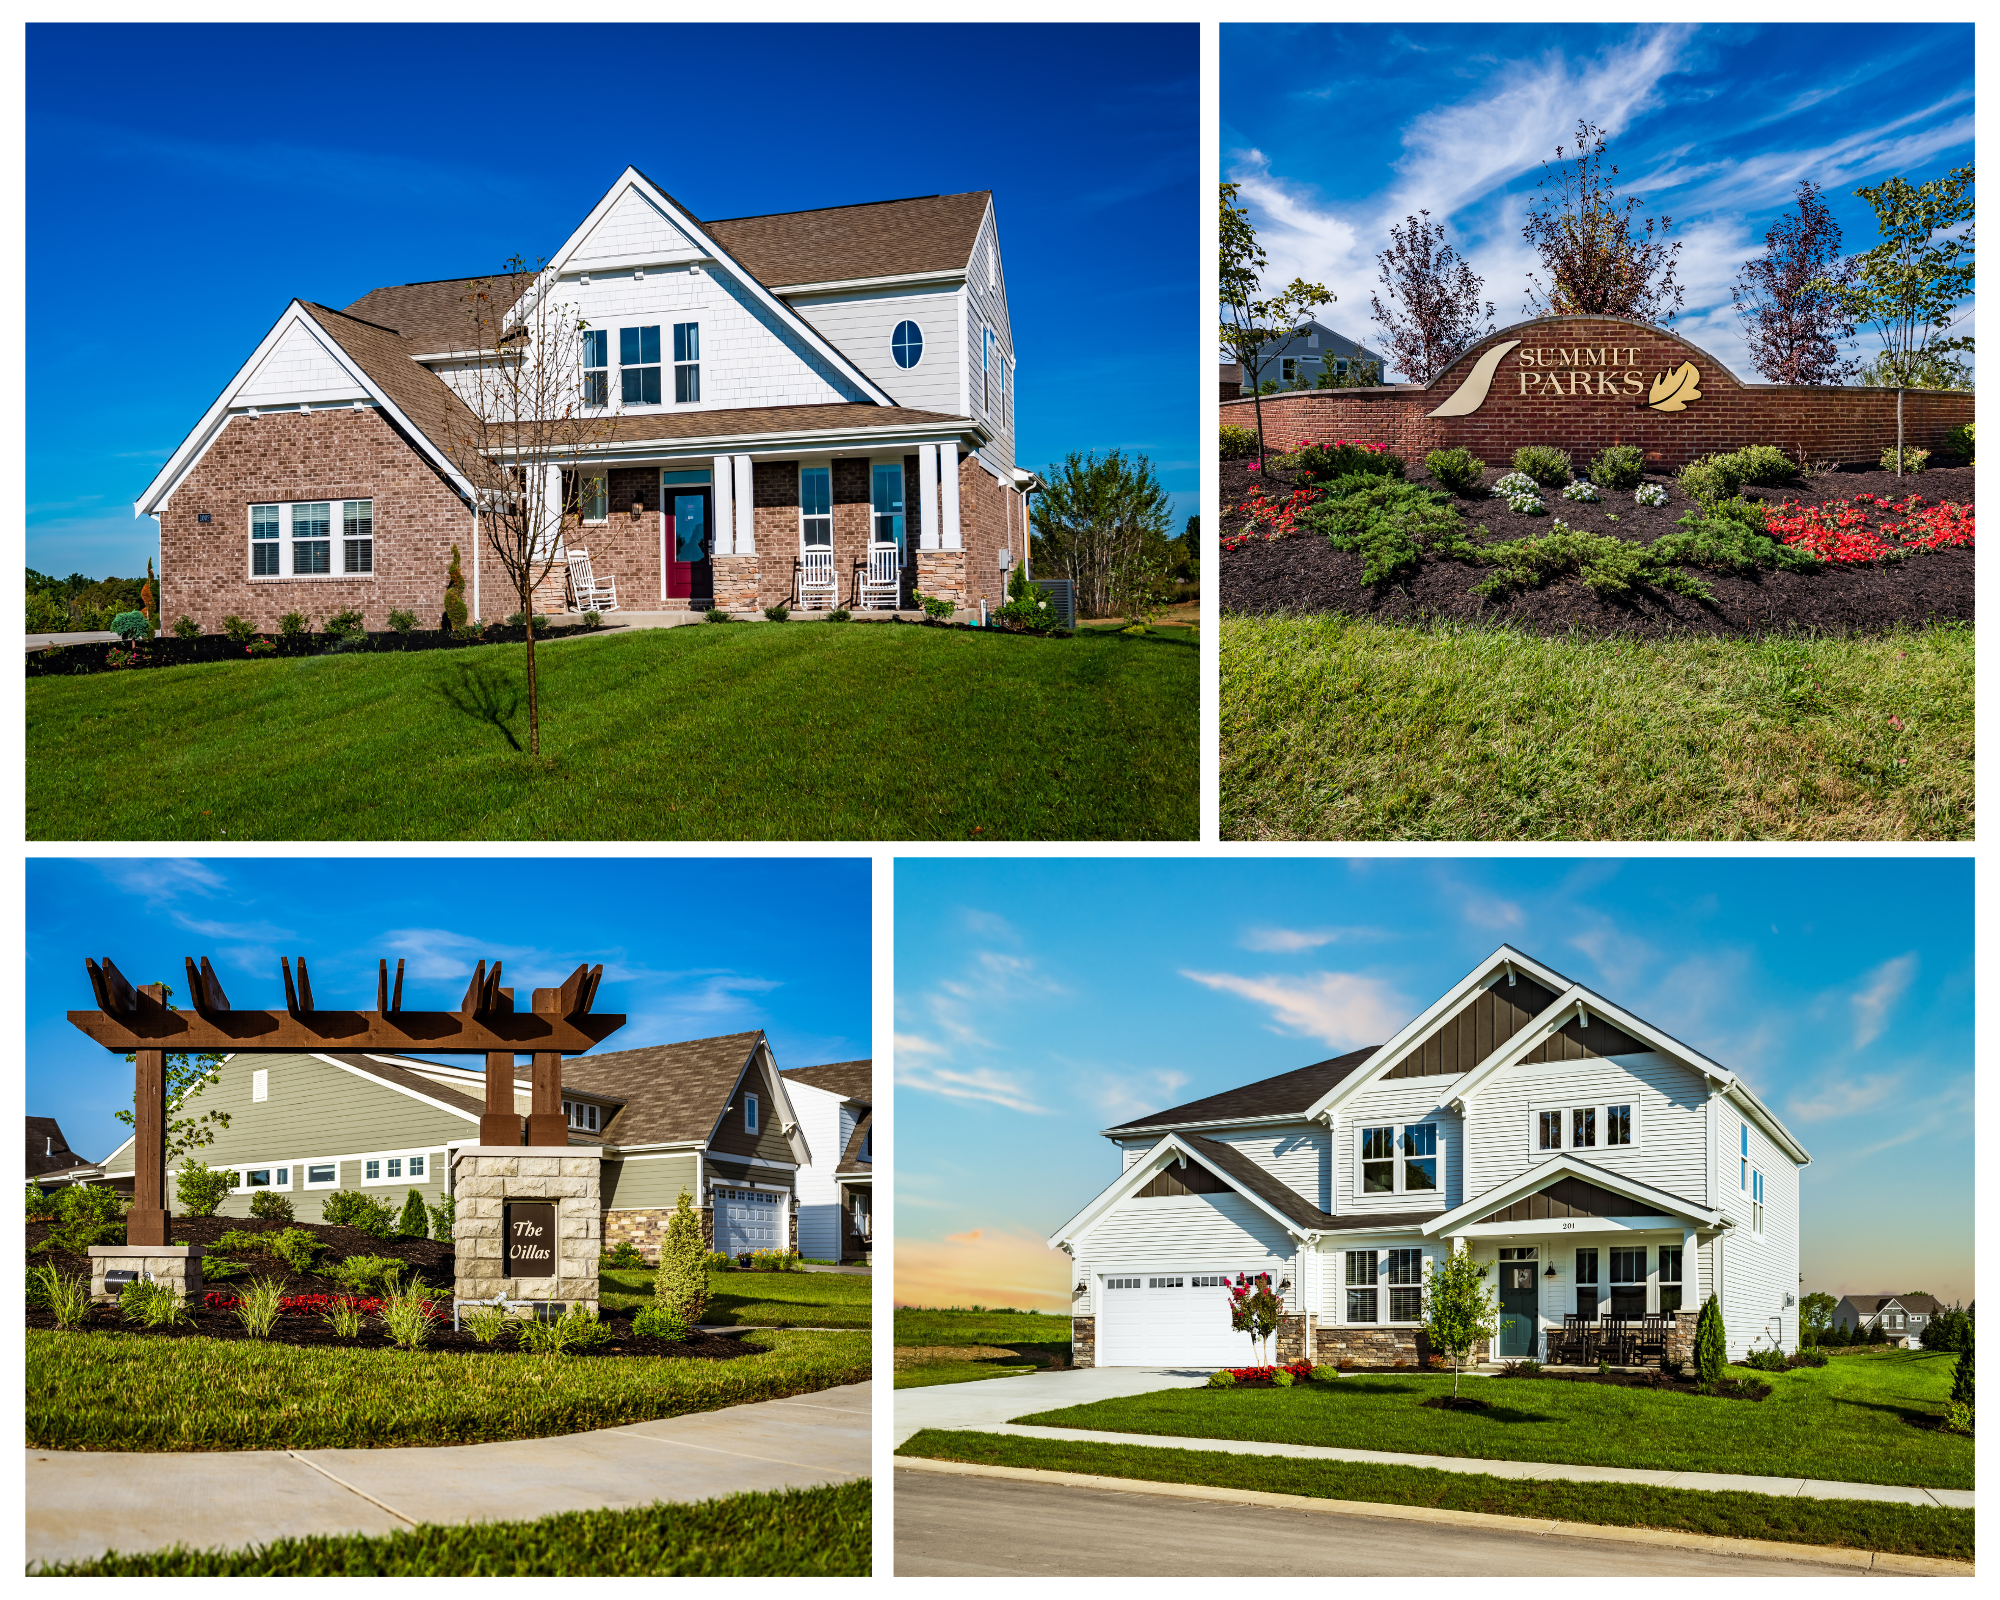 Select from one of our stunning Louisville communities to build and go through the unique process of personalizing your brand new dream home from start to finish.